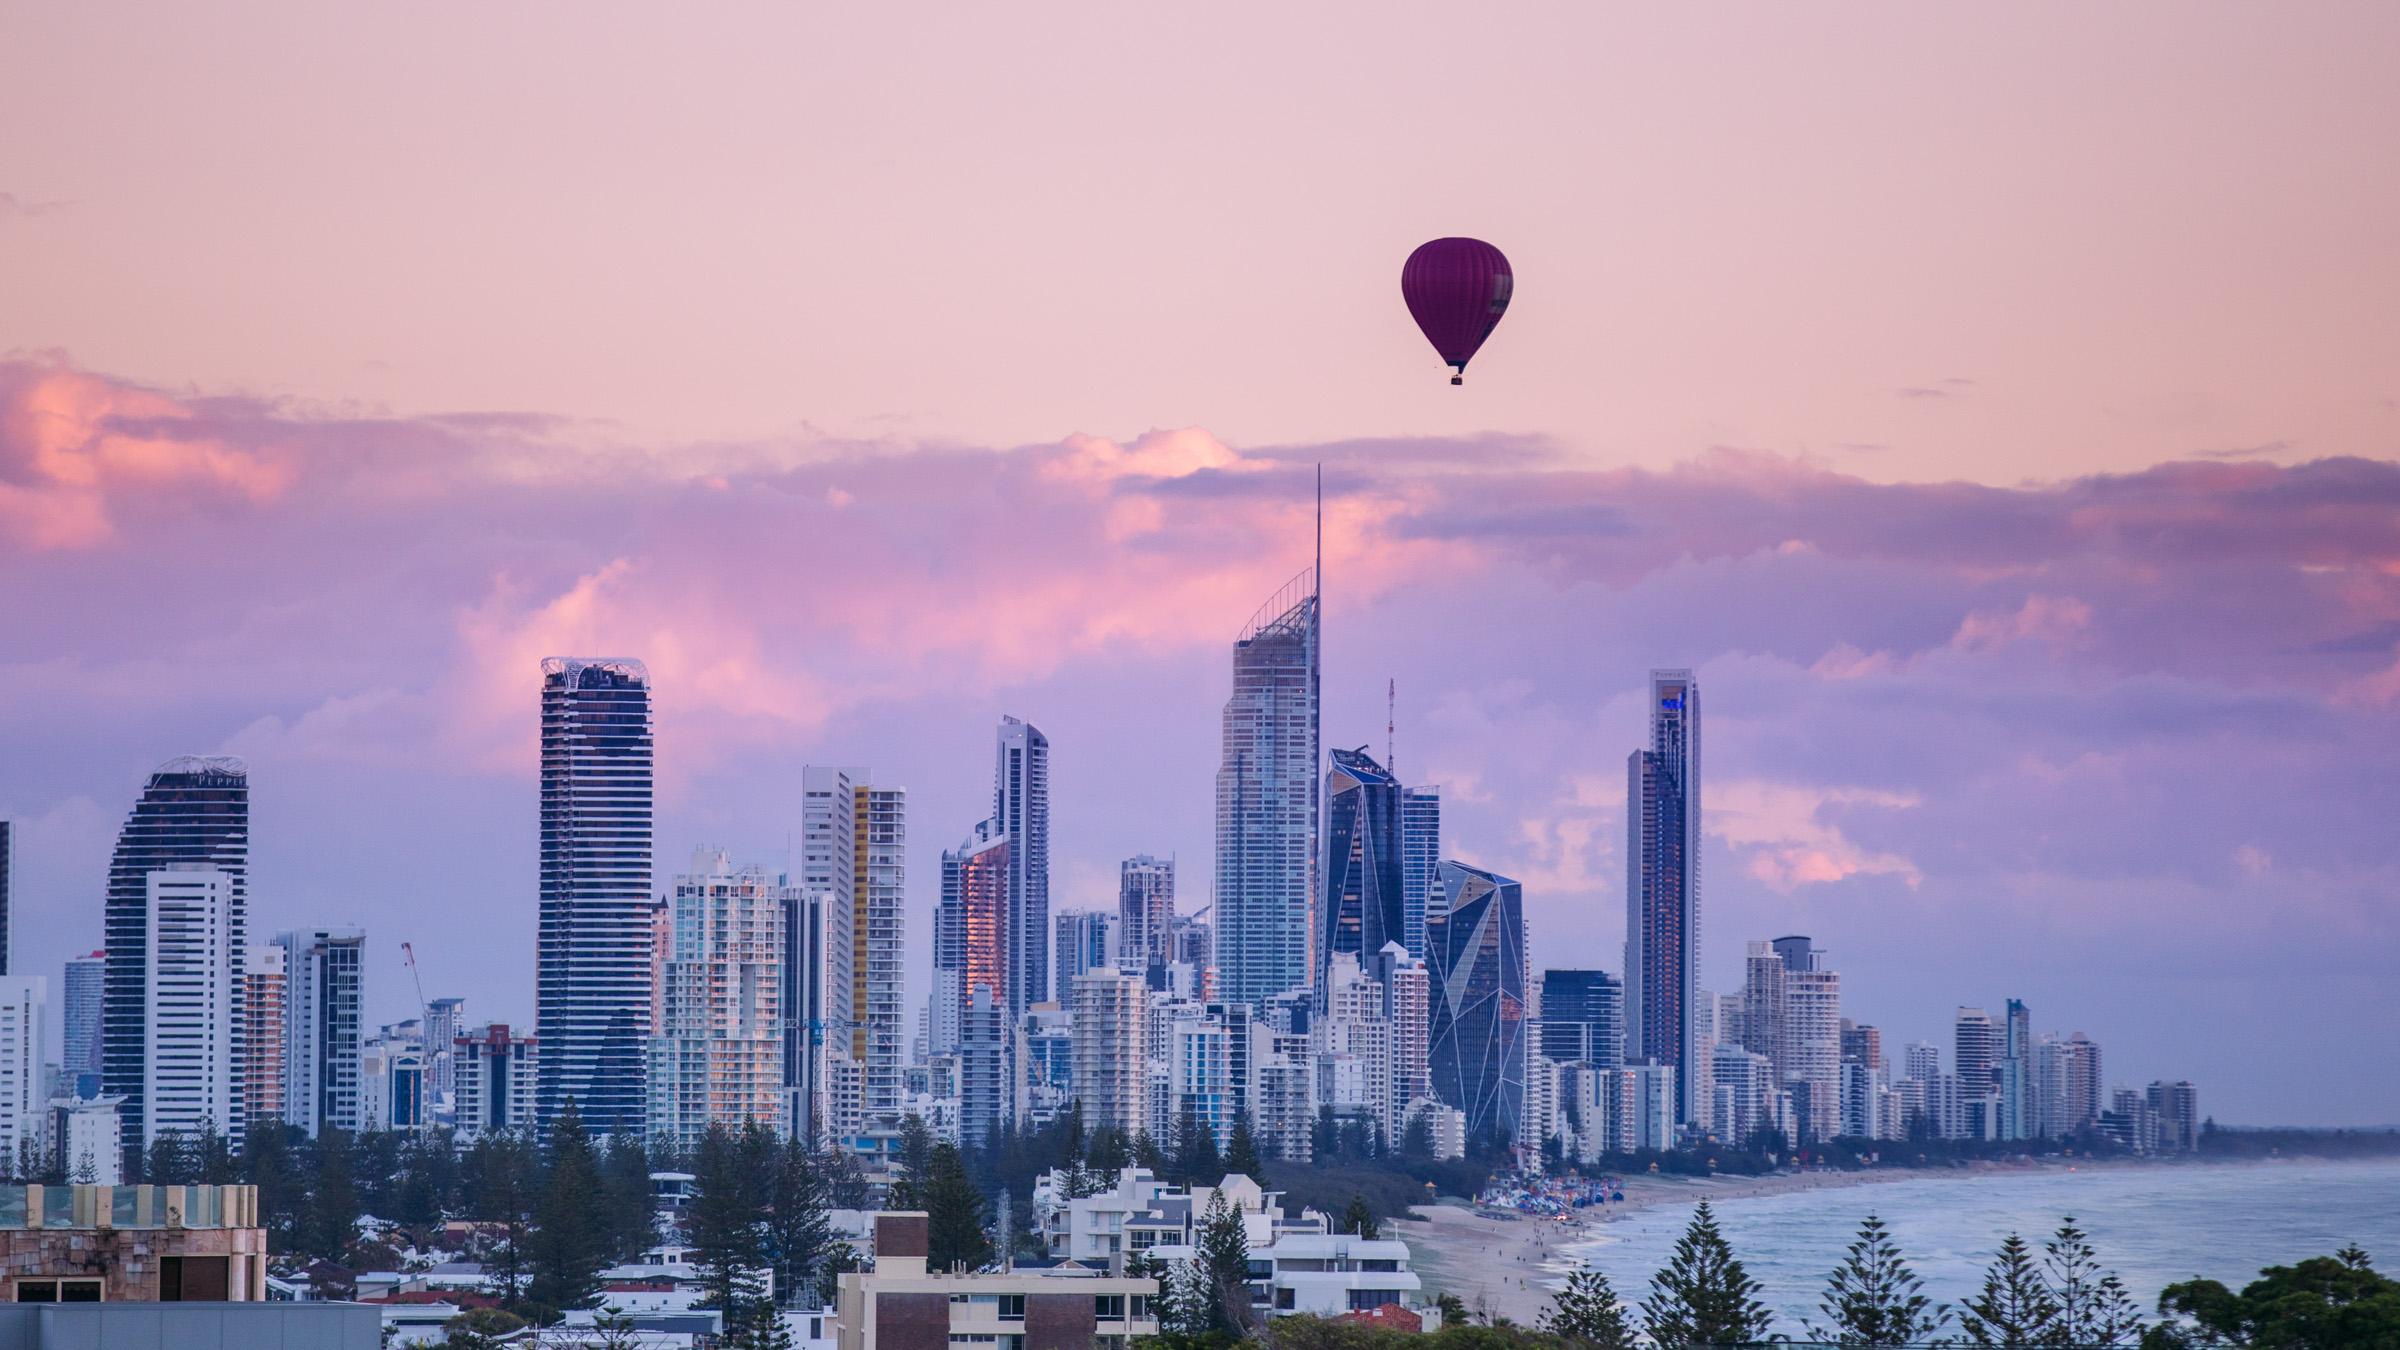 A pink and purple sunset over Surfers Paradise with a hot air balloon floating in front of the cityscape